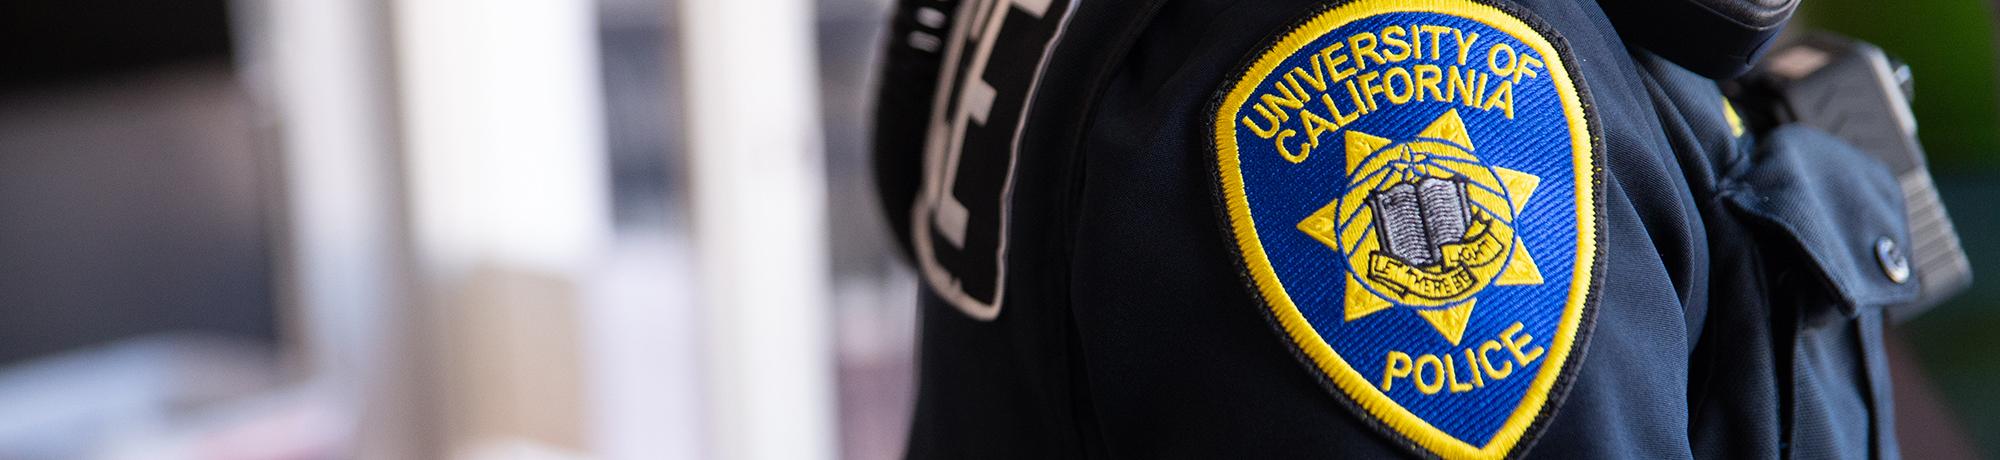 Close-up of a University of California Police Department patch on the side of an Officer's uniform